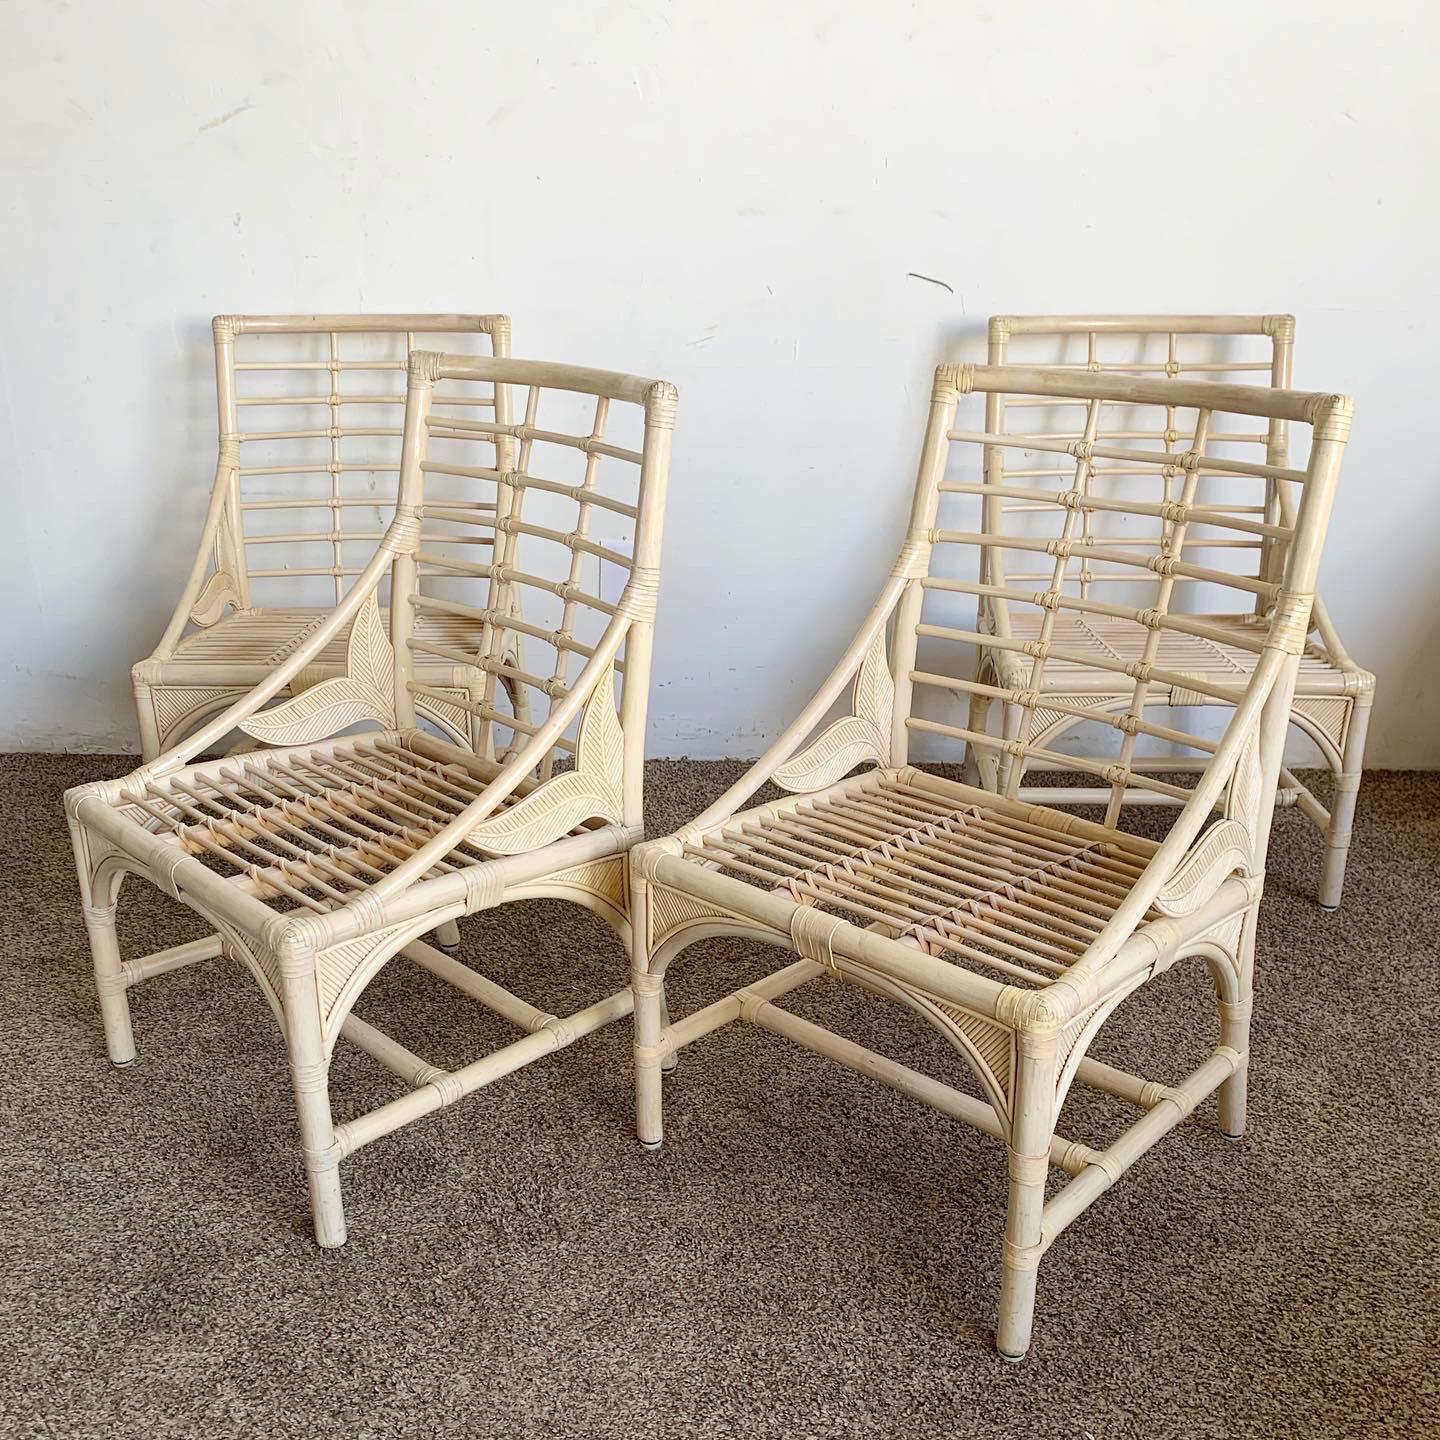 Bohemian Boho Chic Bamboo Rattan Sculpted Pencil Reed Dining Chairs - Set of 4 For Sale